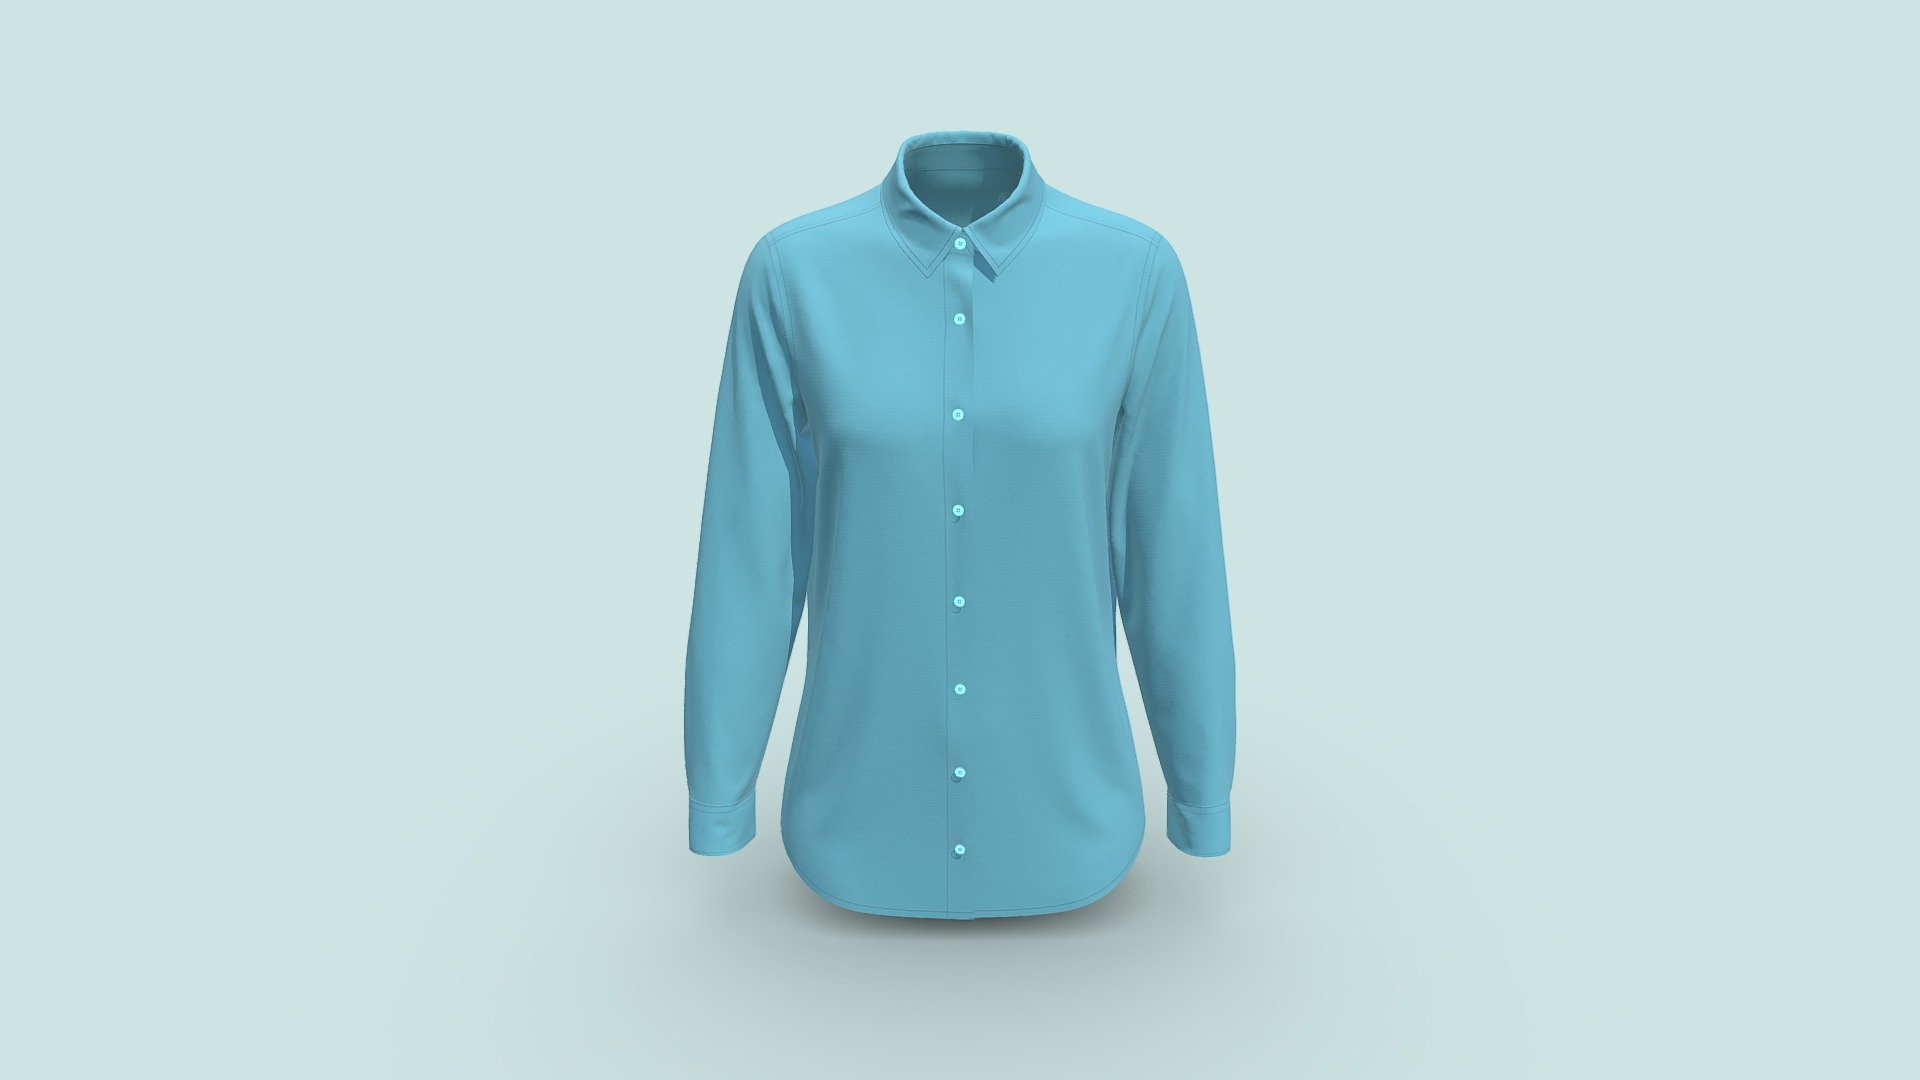 Cloth Title = Casual Women Shirt 

SKU = DG100283 

Category = Women 

Product Type = Shirt 

Cloth Length = Regular 

Body Fit = Regular Fit 

Occasion = Formal 

Sleeve Style = Long Sleeve 


Our Services:

3D Apparel Design.

OBJ,FBX,GLTF Making with High/Low Poly.

Fabric Digitalization.

Mockup making.

3D Teck Pack.

Pattern Making.

2D Illustration.

Cloth Animation and 360 Spin Video.


Contact us:- 

Email: info@digitalfashionwear.com 

Website: https://digitalfashionwear.com 


We designed all the types of cloth specially focused on product visualization, e-commerce, fitting, and production. 

We will design: 

T-shirts 

Polo shirts 

Hoodies 

Sweatshirt 

Jackets 

Shirts 

TankTops 

Trousers 

Bras 

Underwear 

Blazer 

Aprons 

Leggings 

and All Fashion items. 





Our goal is to make sure what we provide you, meets your demand 3d model